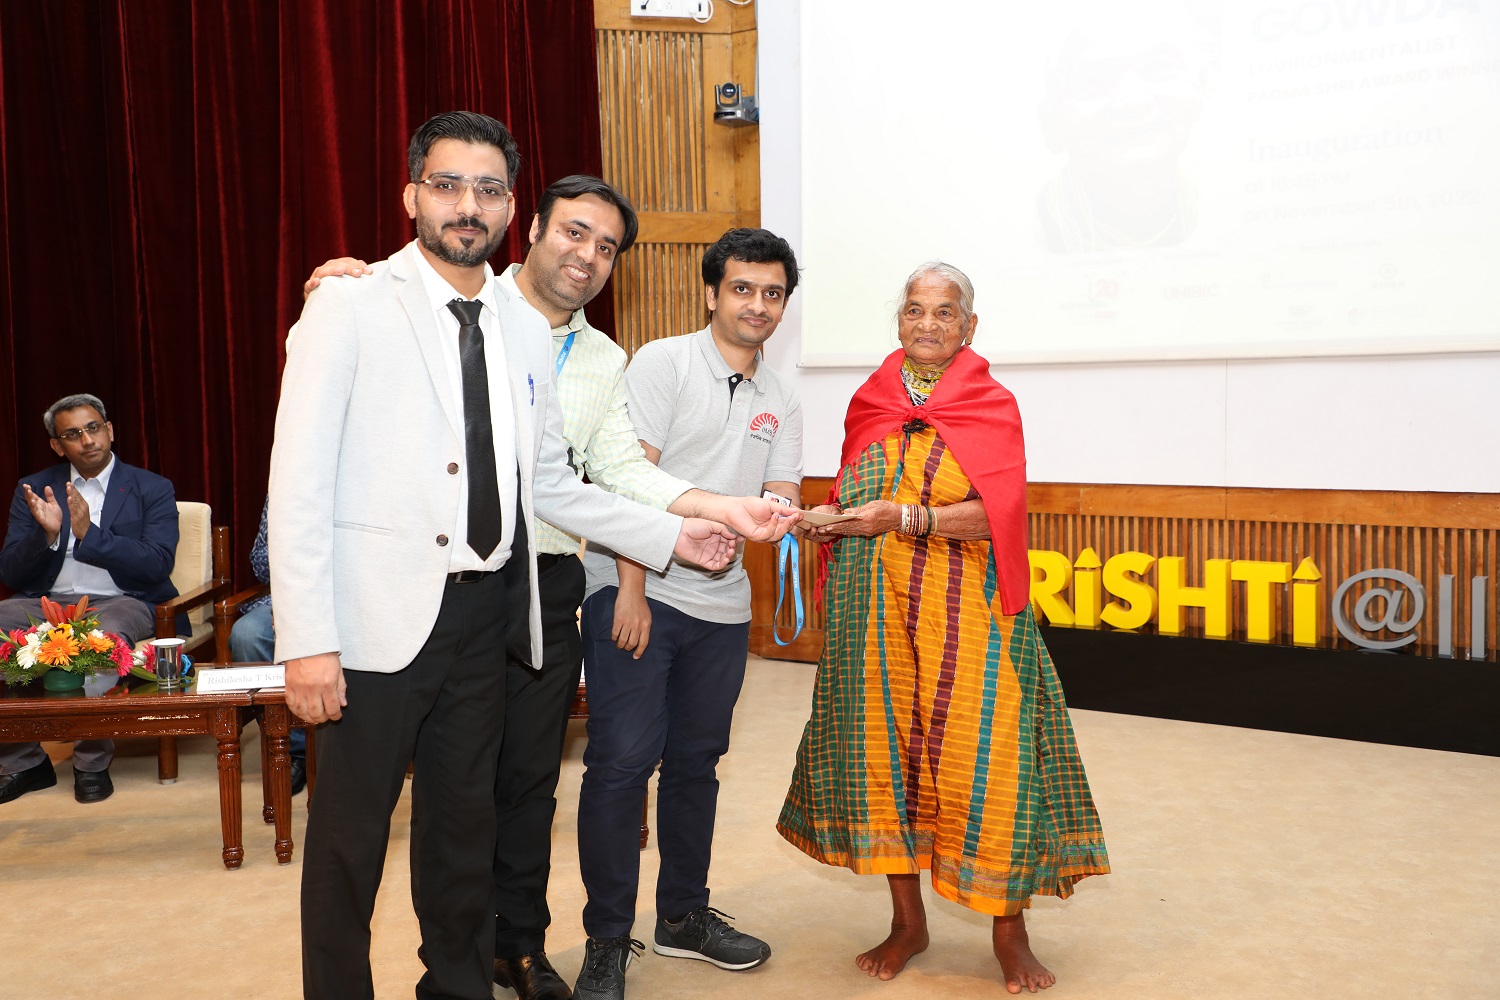 First-year PGPEM students Javed, Abhinav and Vipin receive an award from Smt Tulsi Gowda.